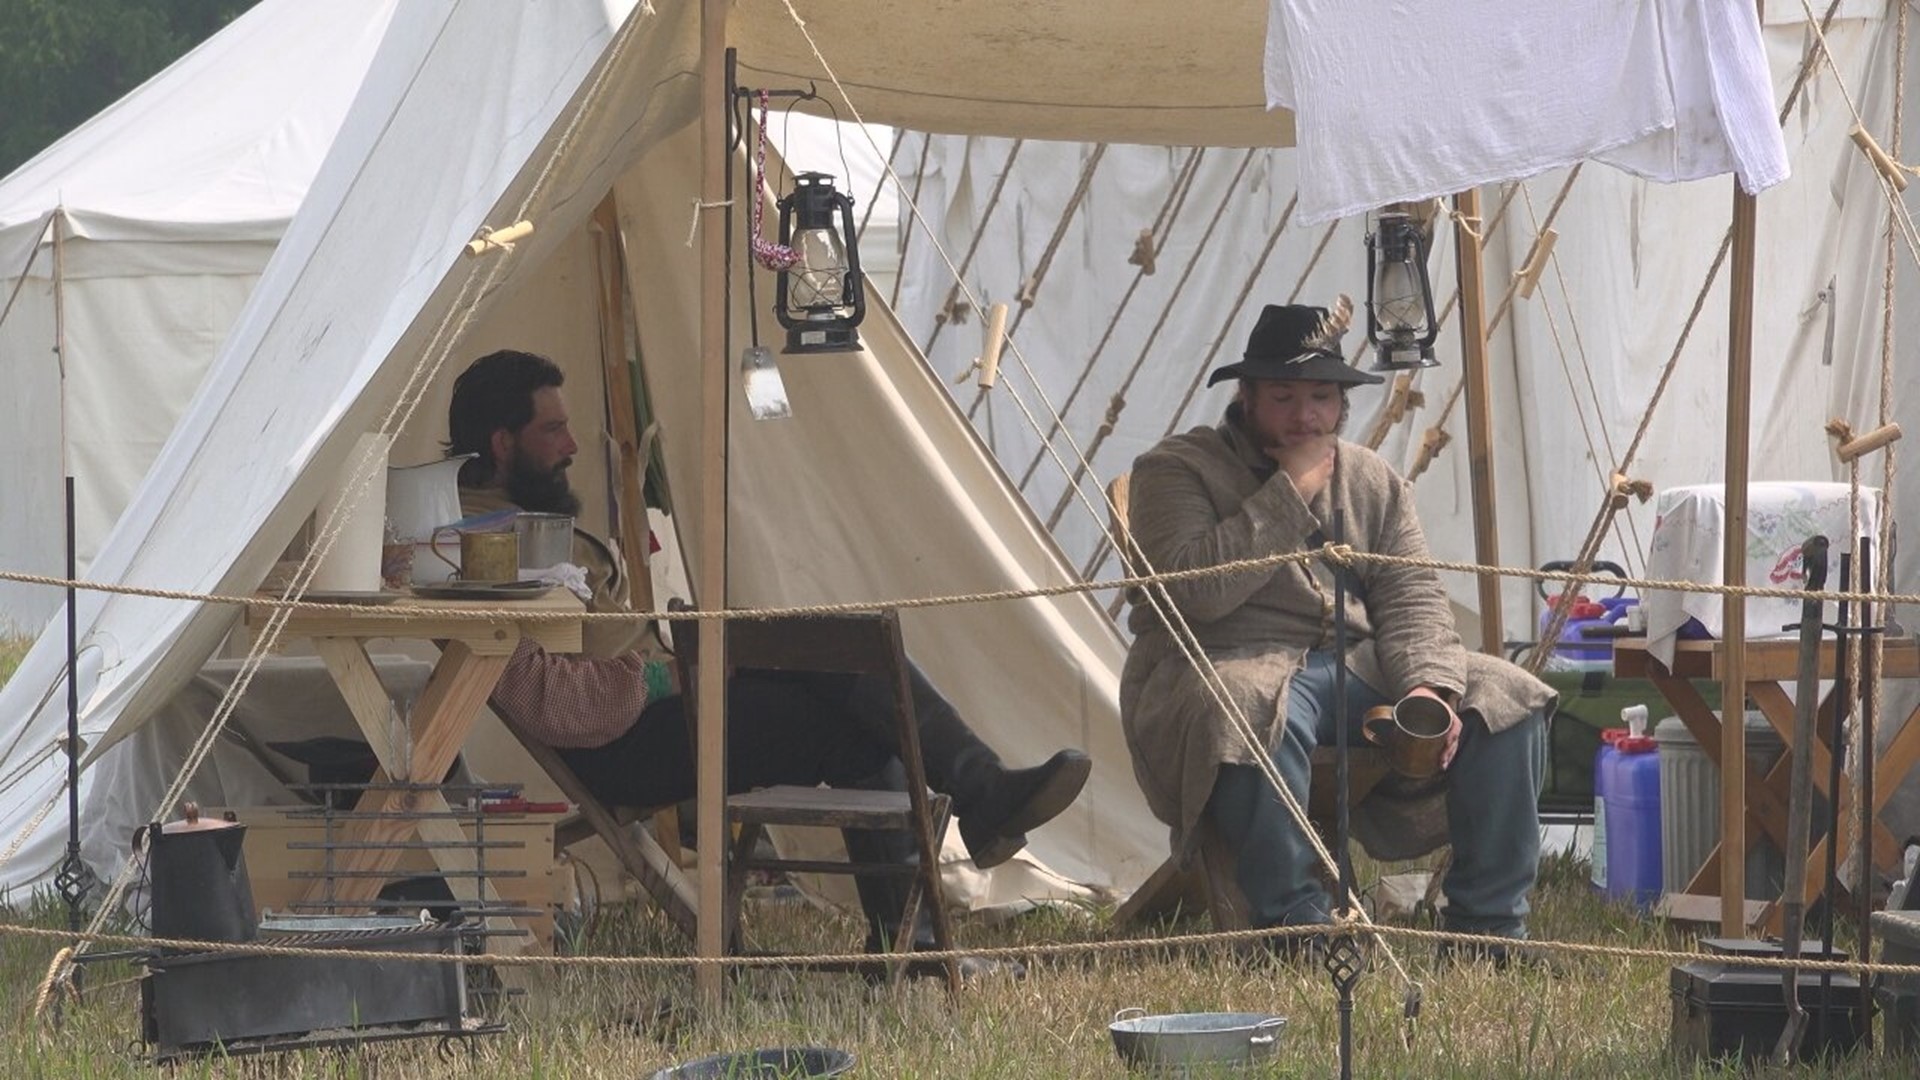 The weekend-long event at the historic Daniel Lady Farm is to commemorate the battle that's often referenced as a turning point of the Civil War